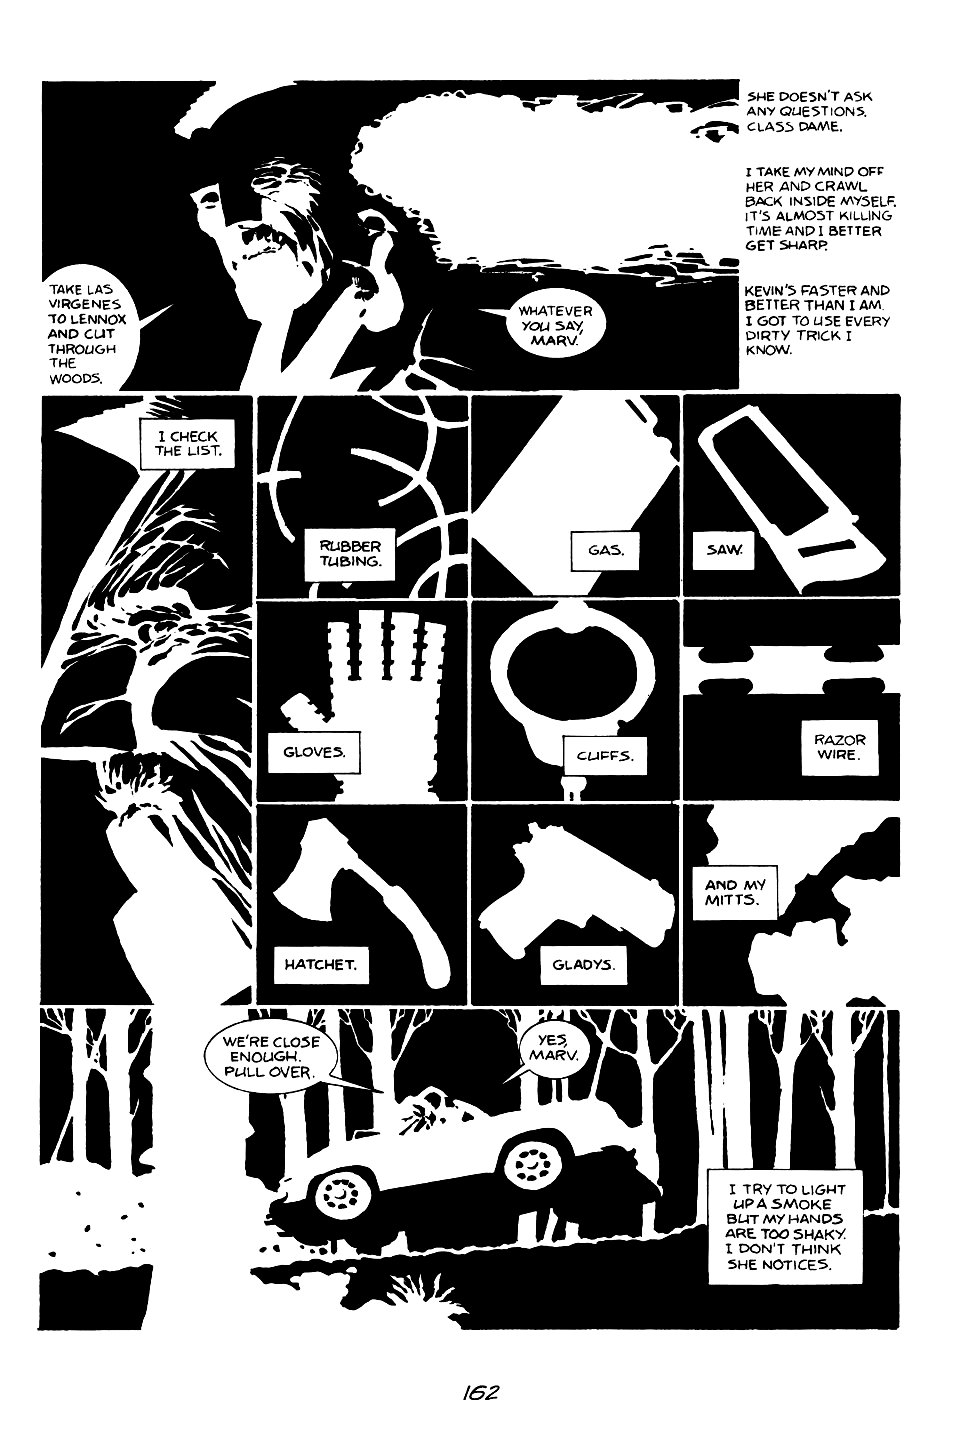 page 162 of sin city 1 the hard goodbye